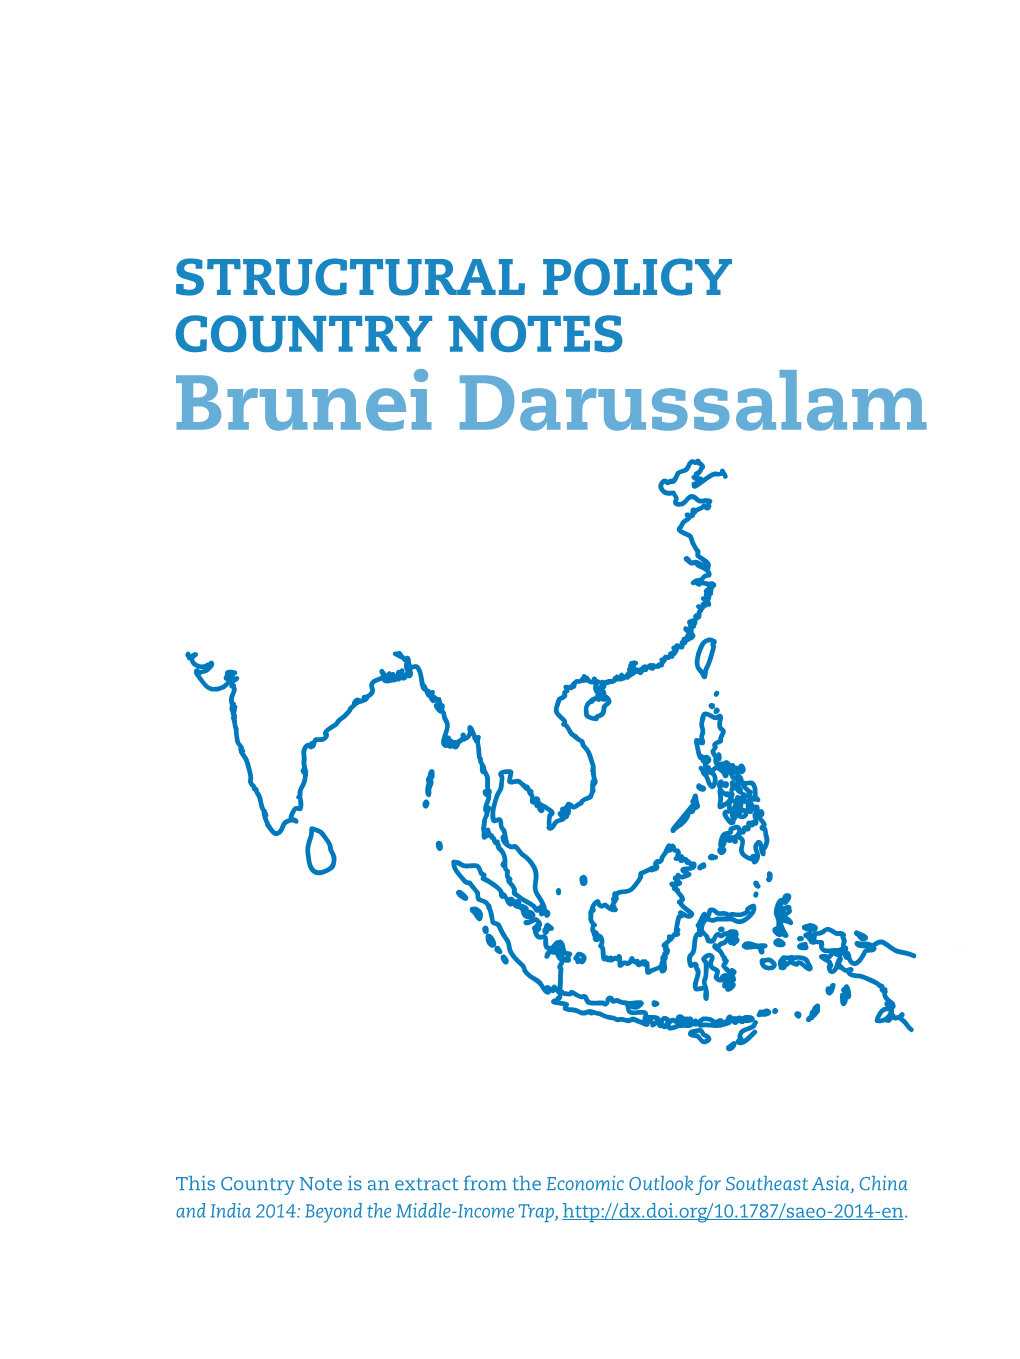 STRUCTURAL POLICY COUNTRY NOTES Brunei Darussalam